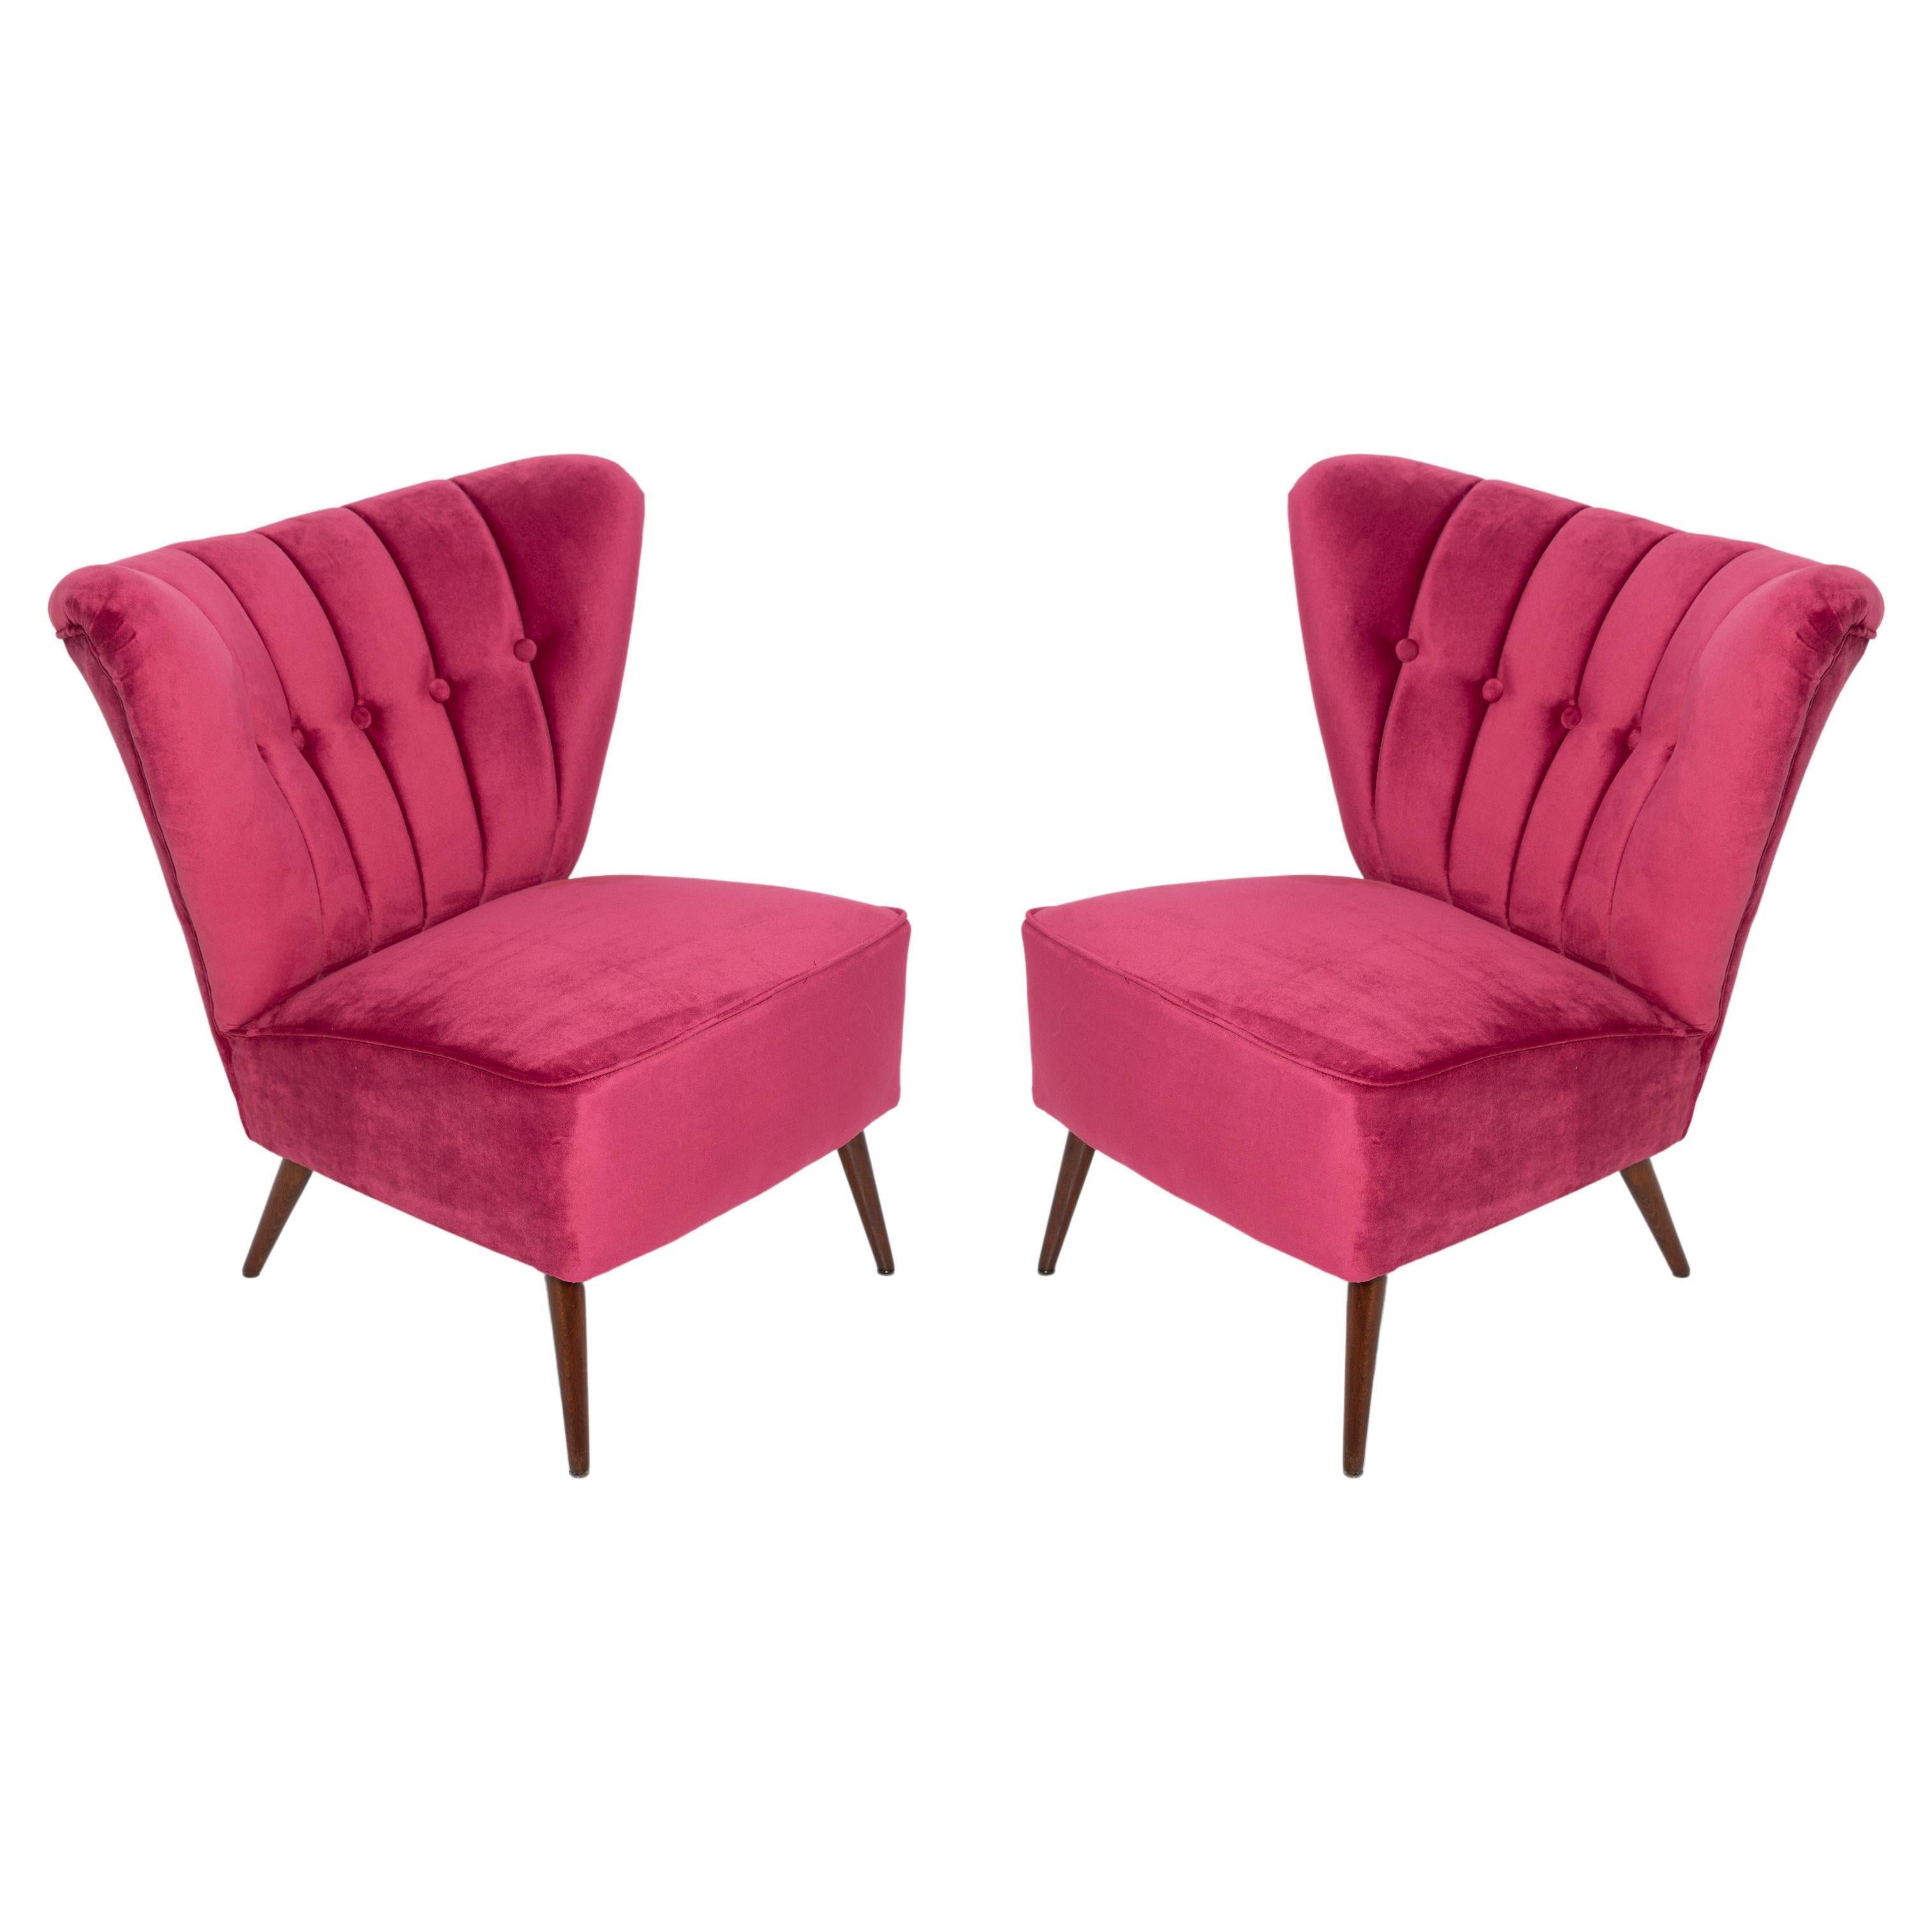 Set of Two Midcentury Magenta Pink Velvet Club Armchairs, Europe, 1960s For Sale